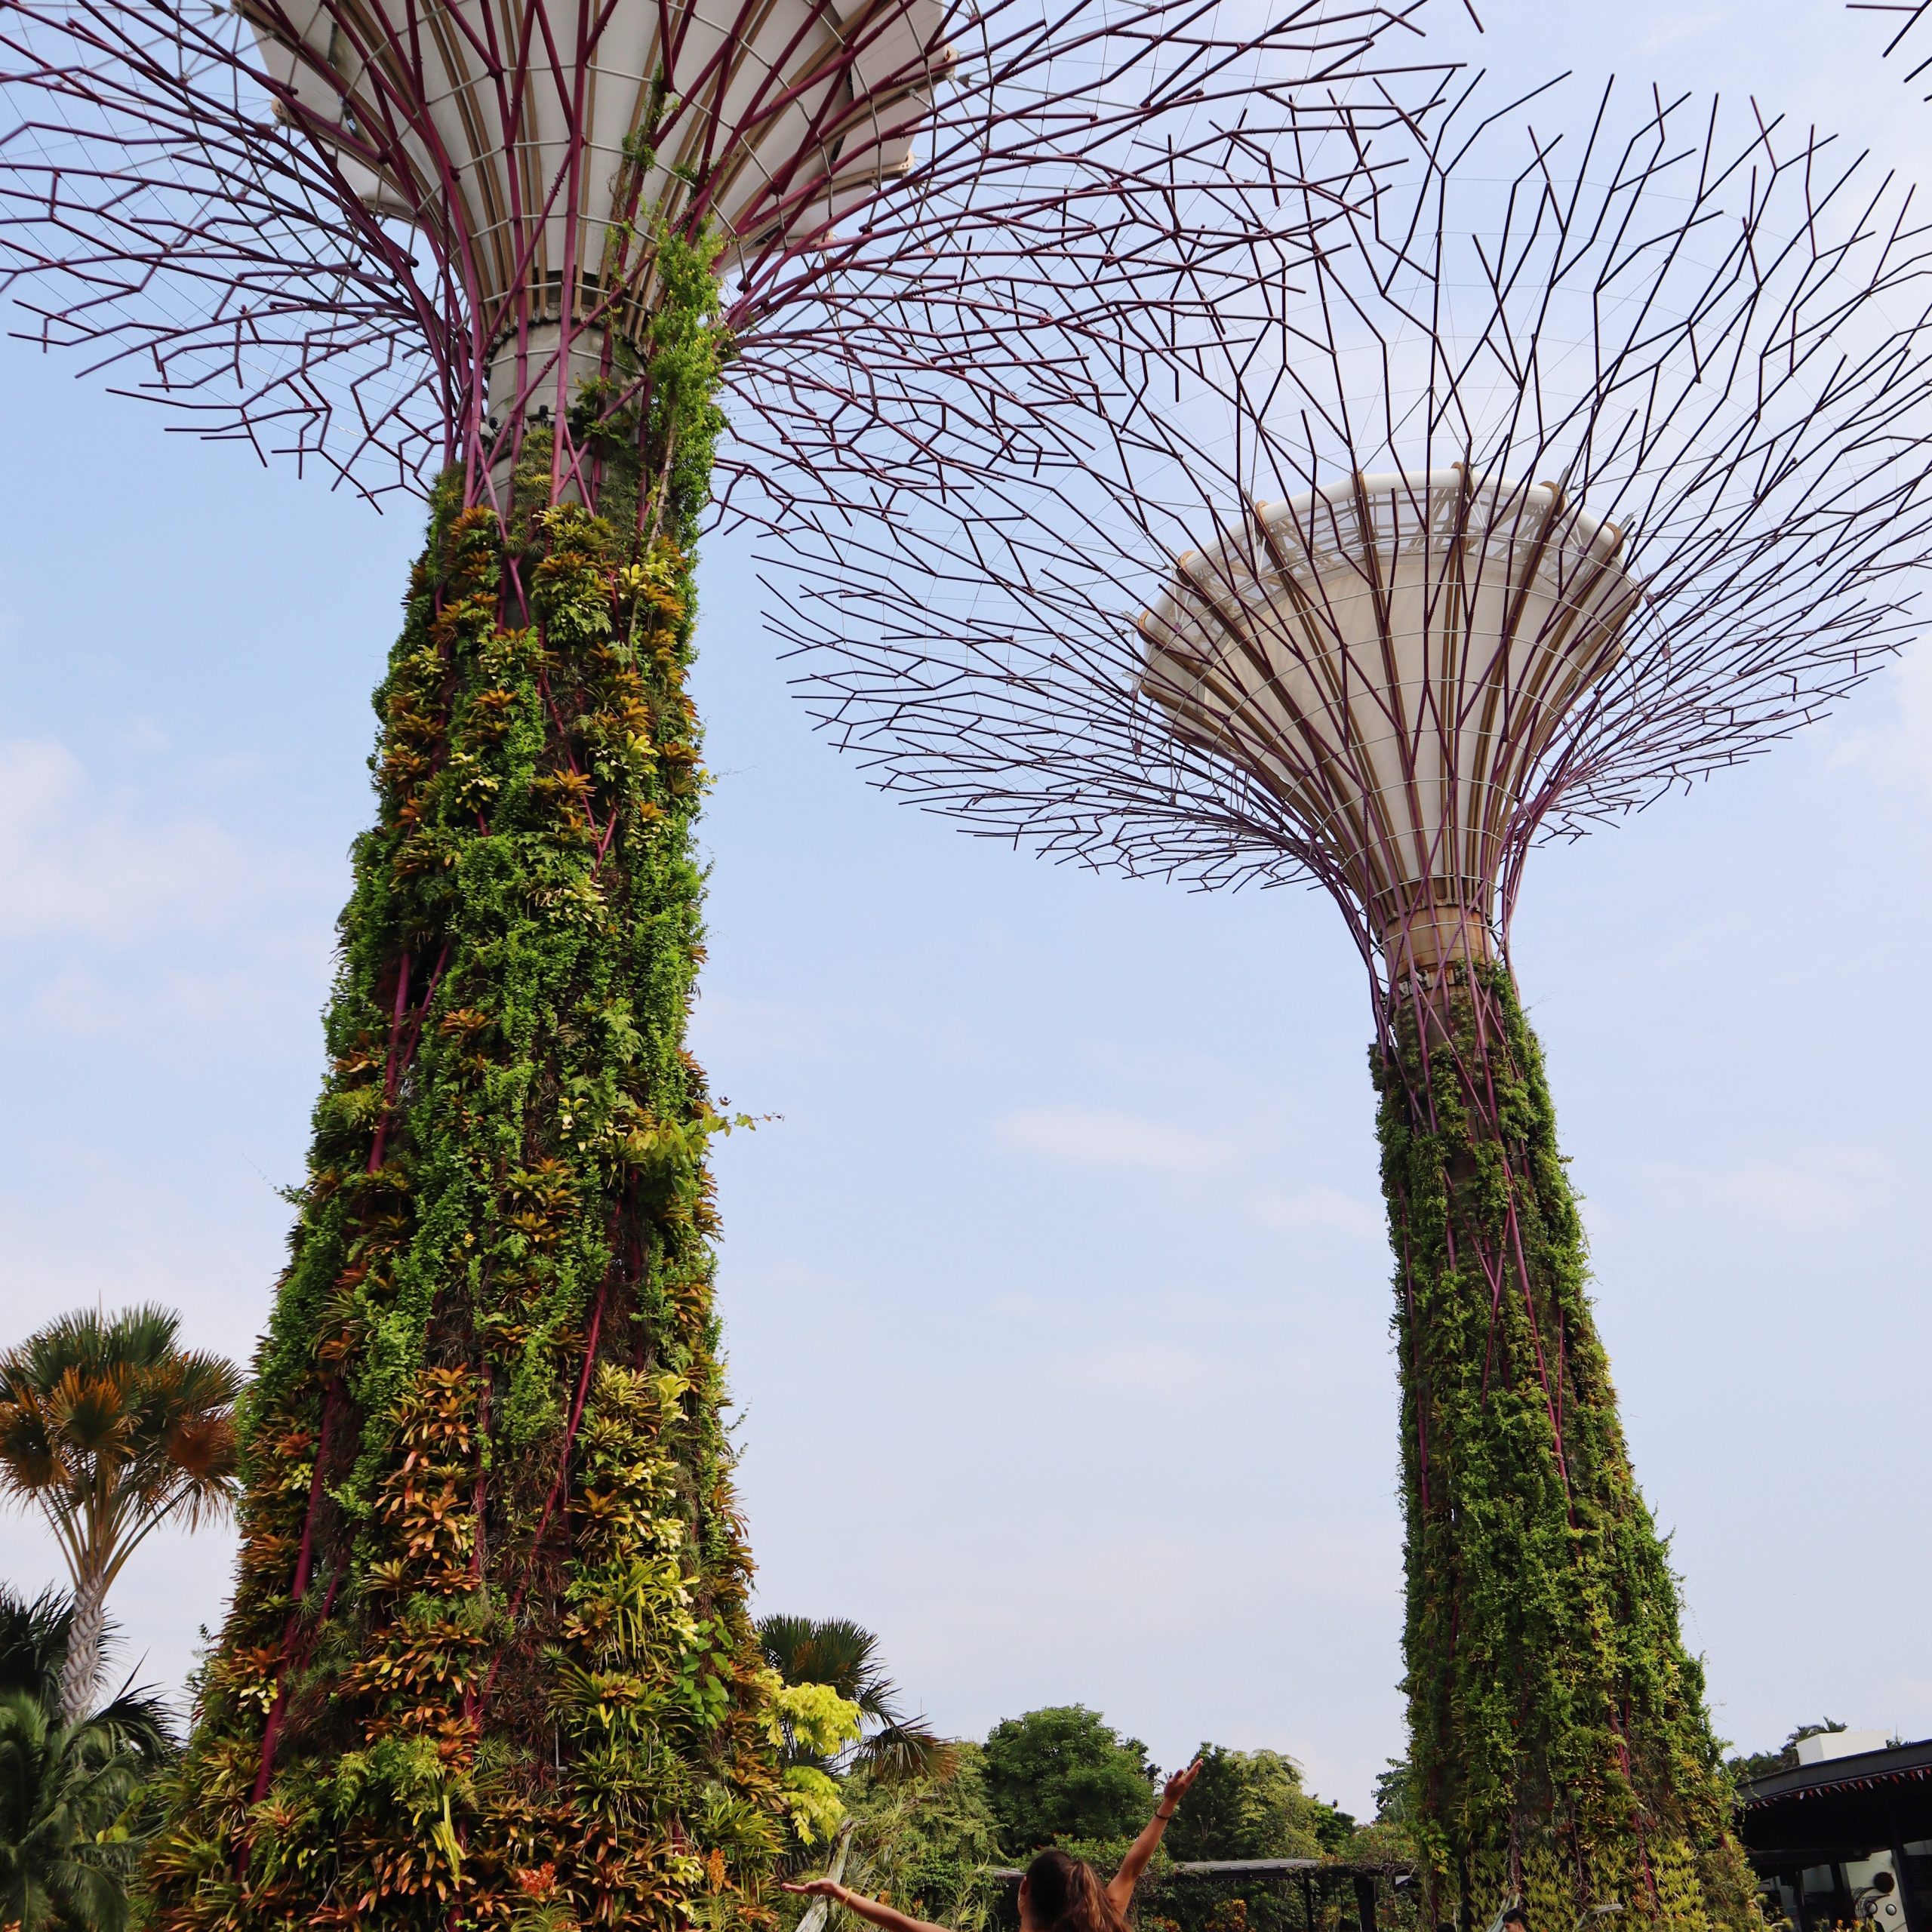 DAY 3 SINGAPORE – GARDENS BY THE BAY + MARINA BAY SANDS